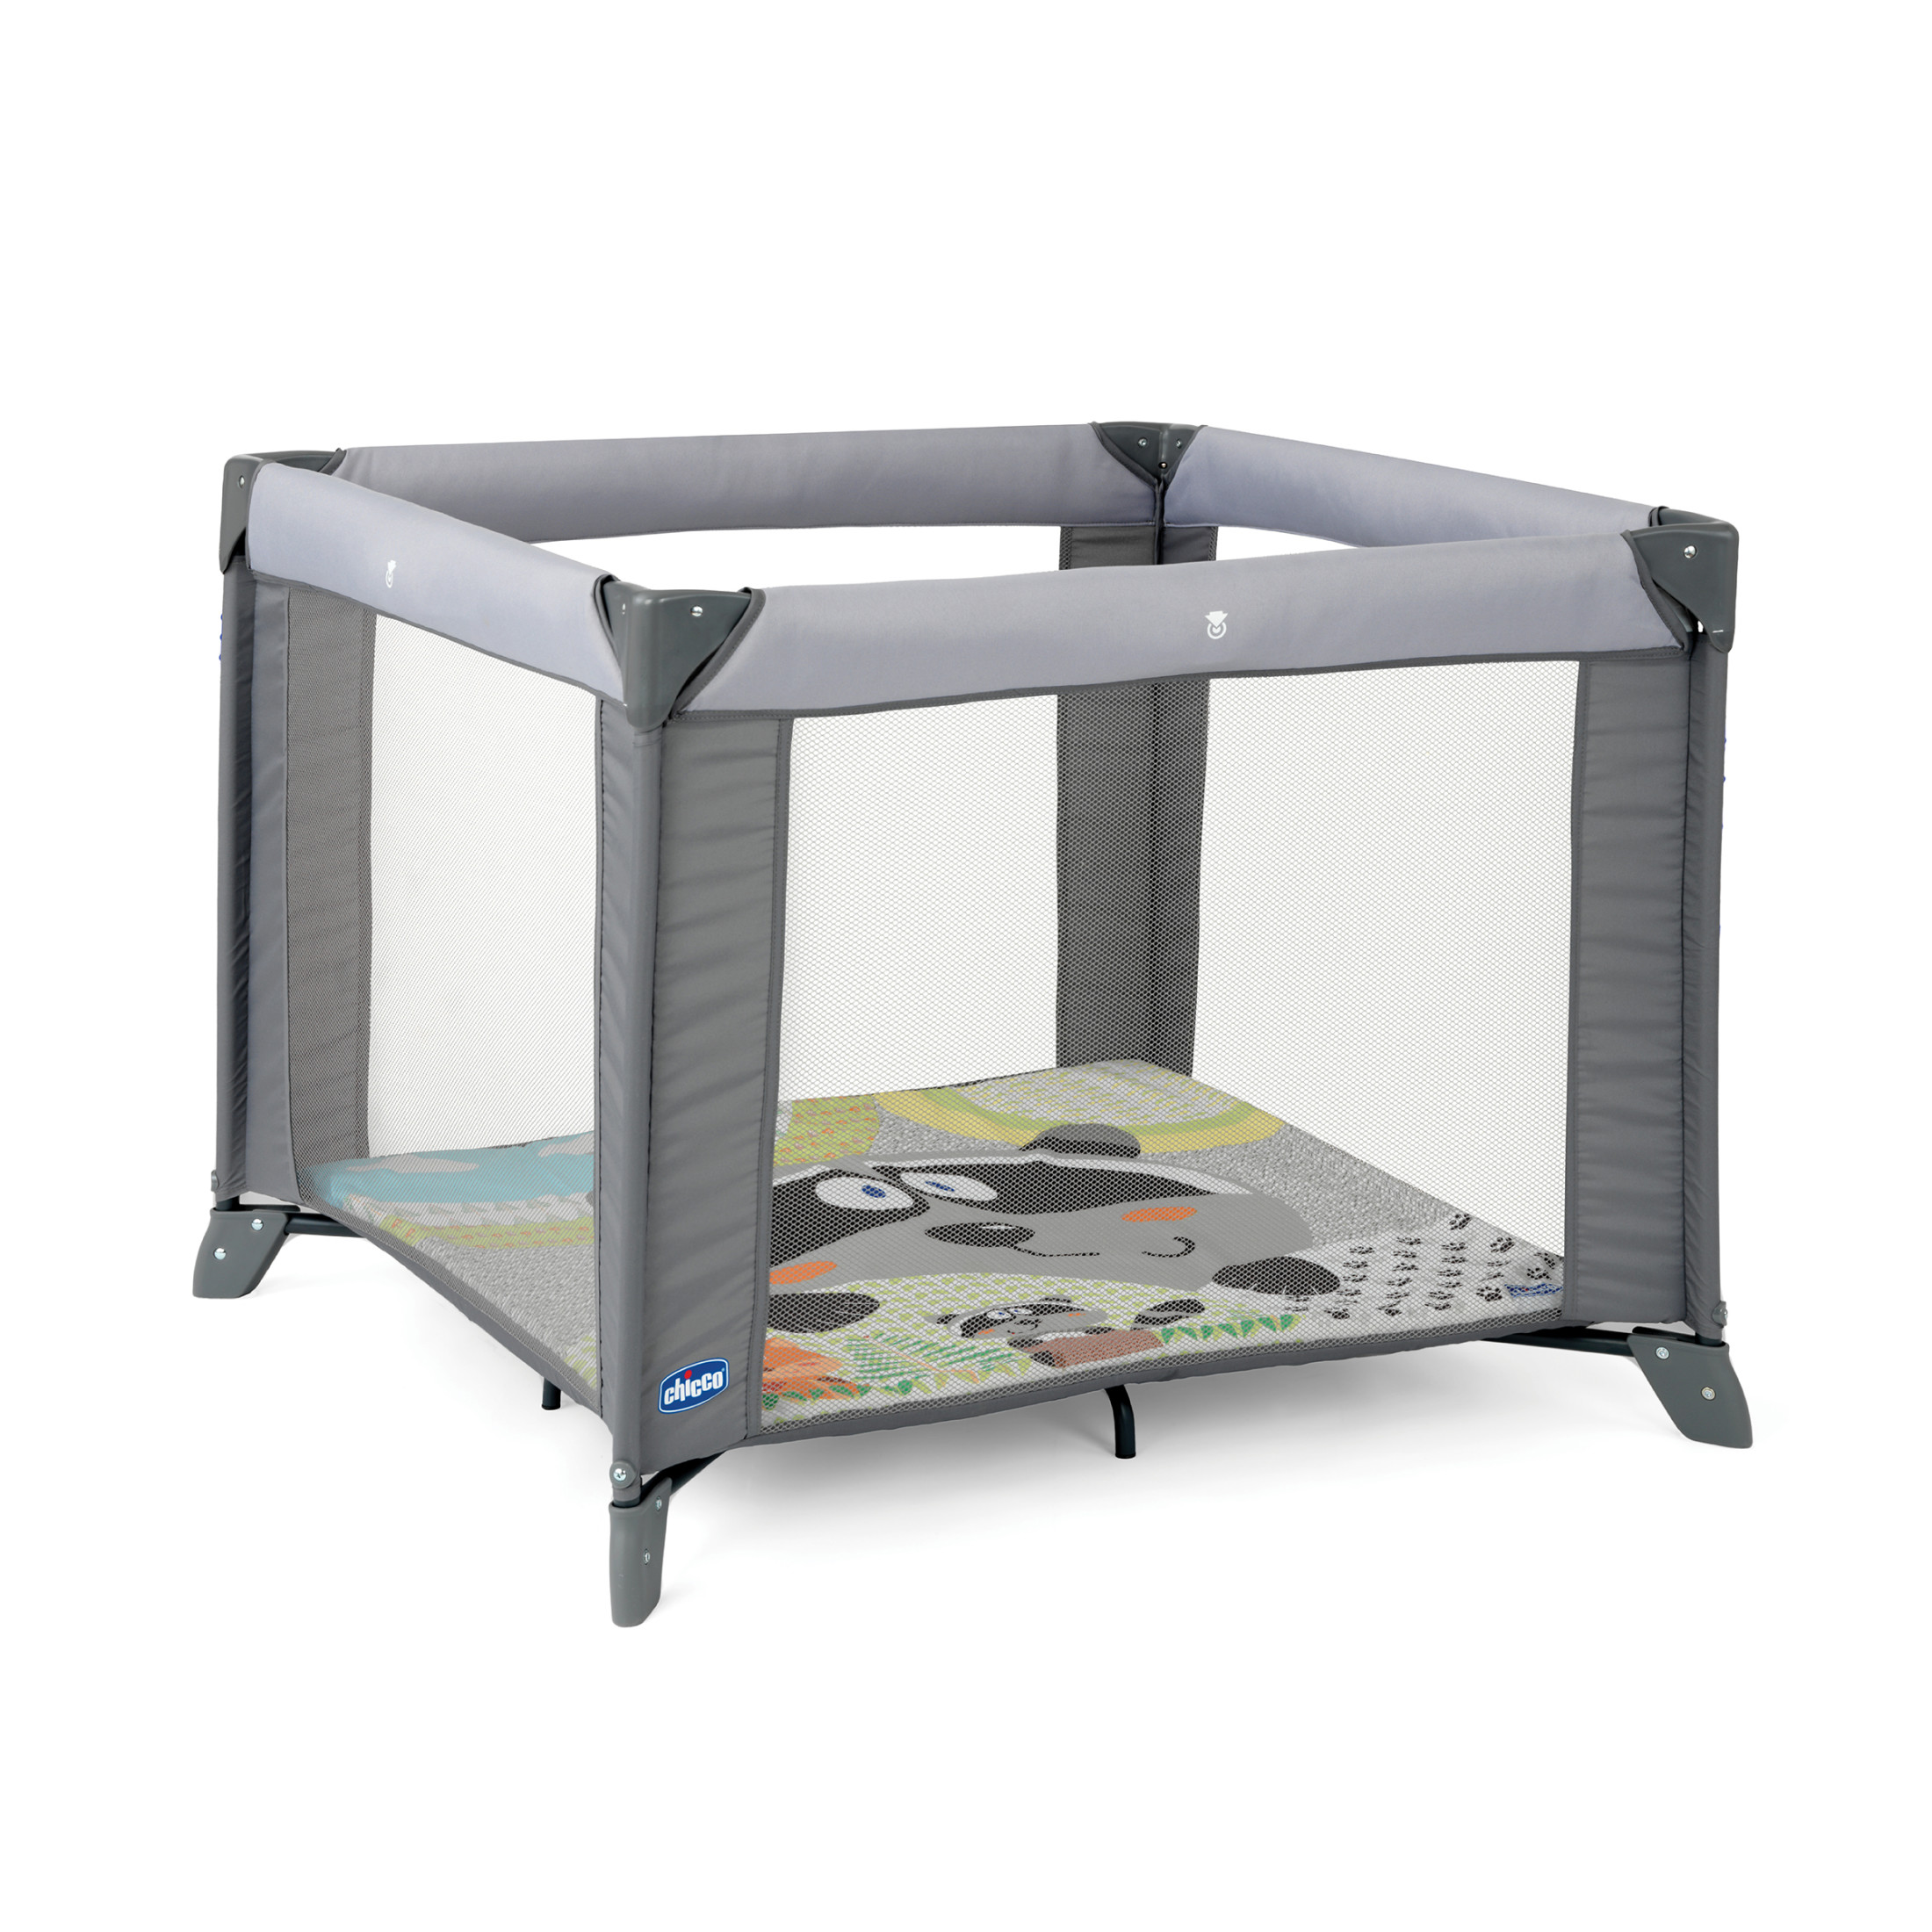 Chicco Tot Quad Portable Square Baby Playpen - Honey Bear (Grey) - image 1 of 7